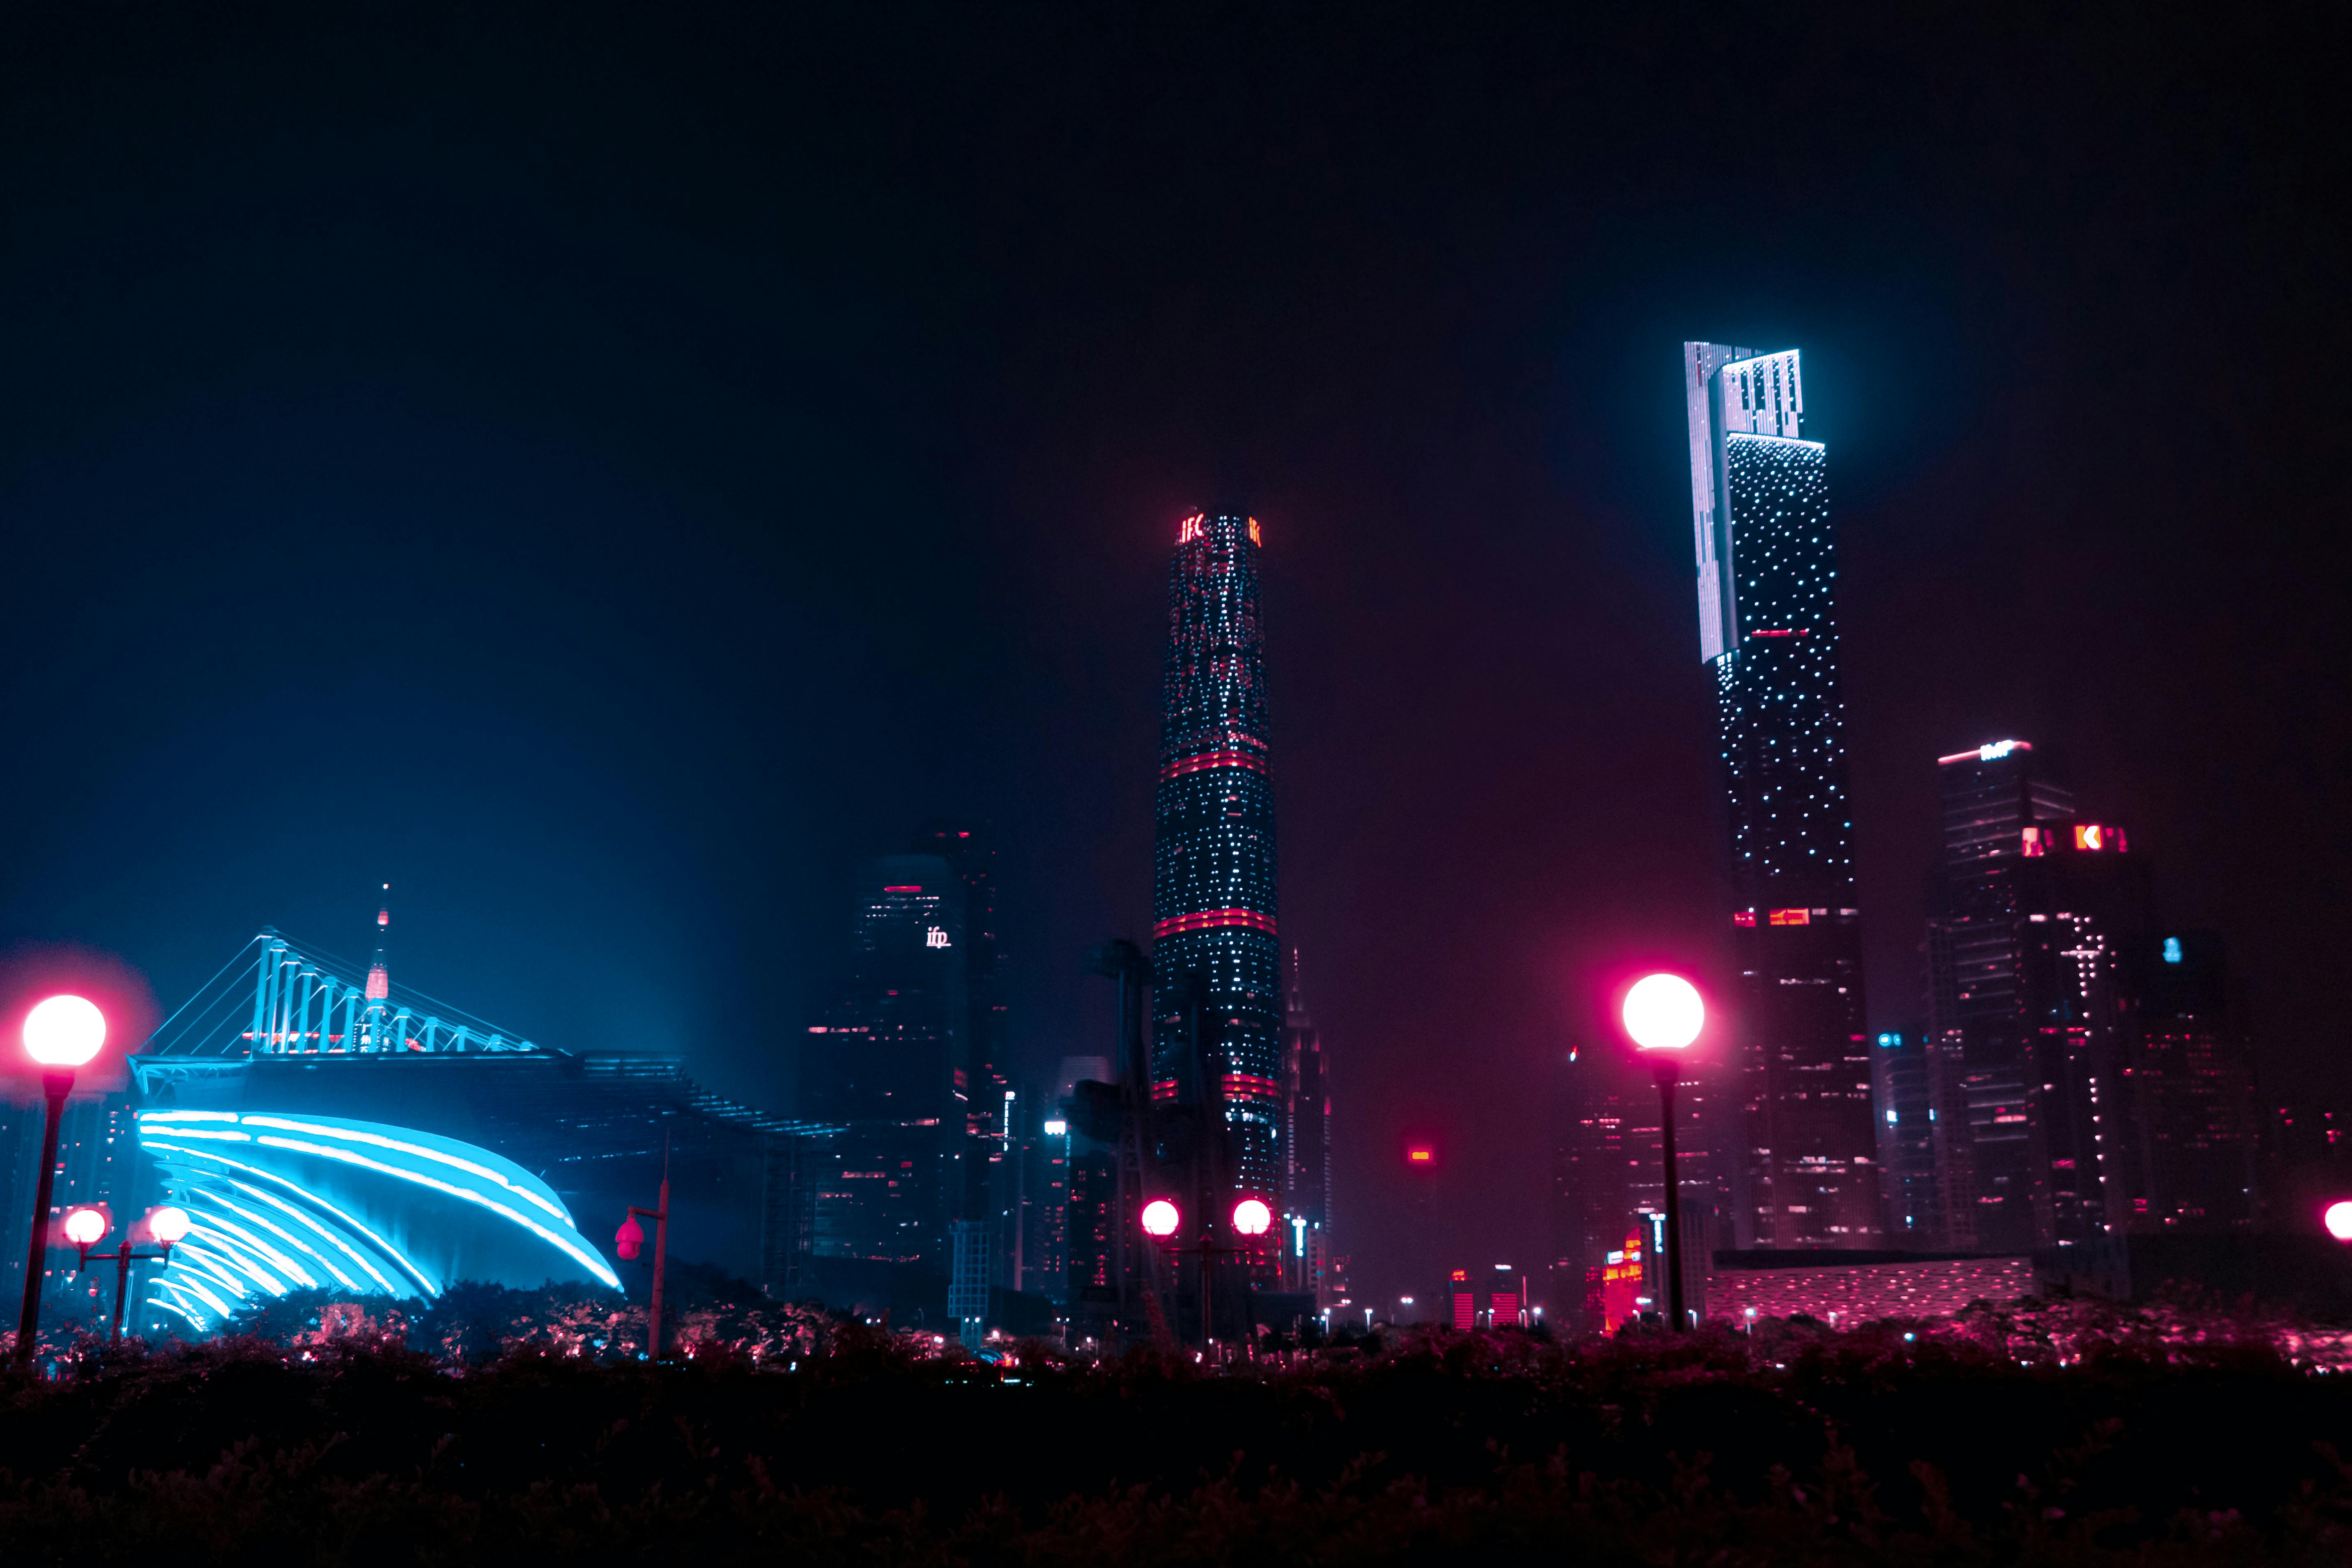 Cyberpunk Night Time Street Background Stock Photo, Picture and Royalty  Free Image. Image 211366195.